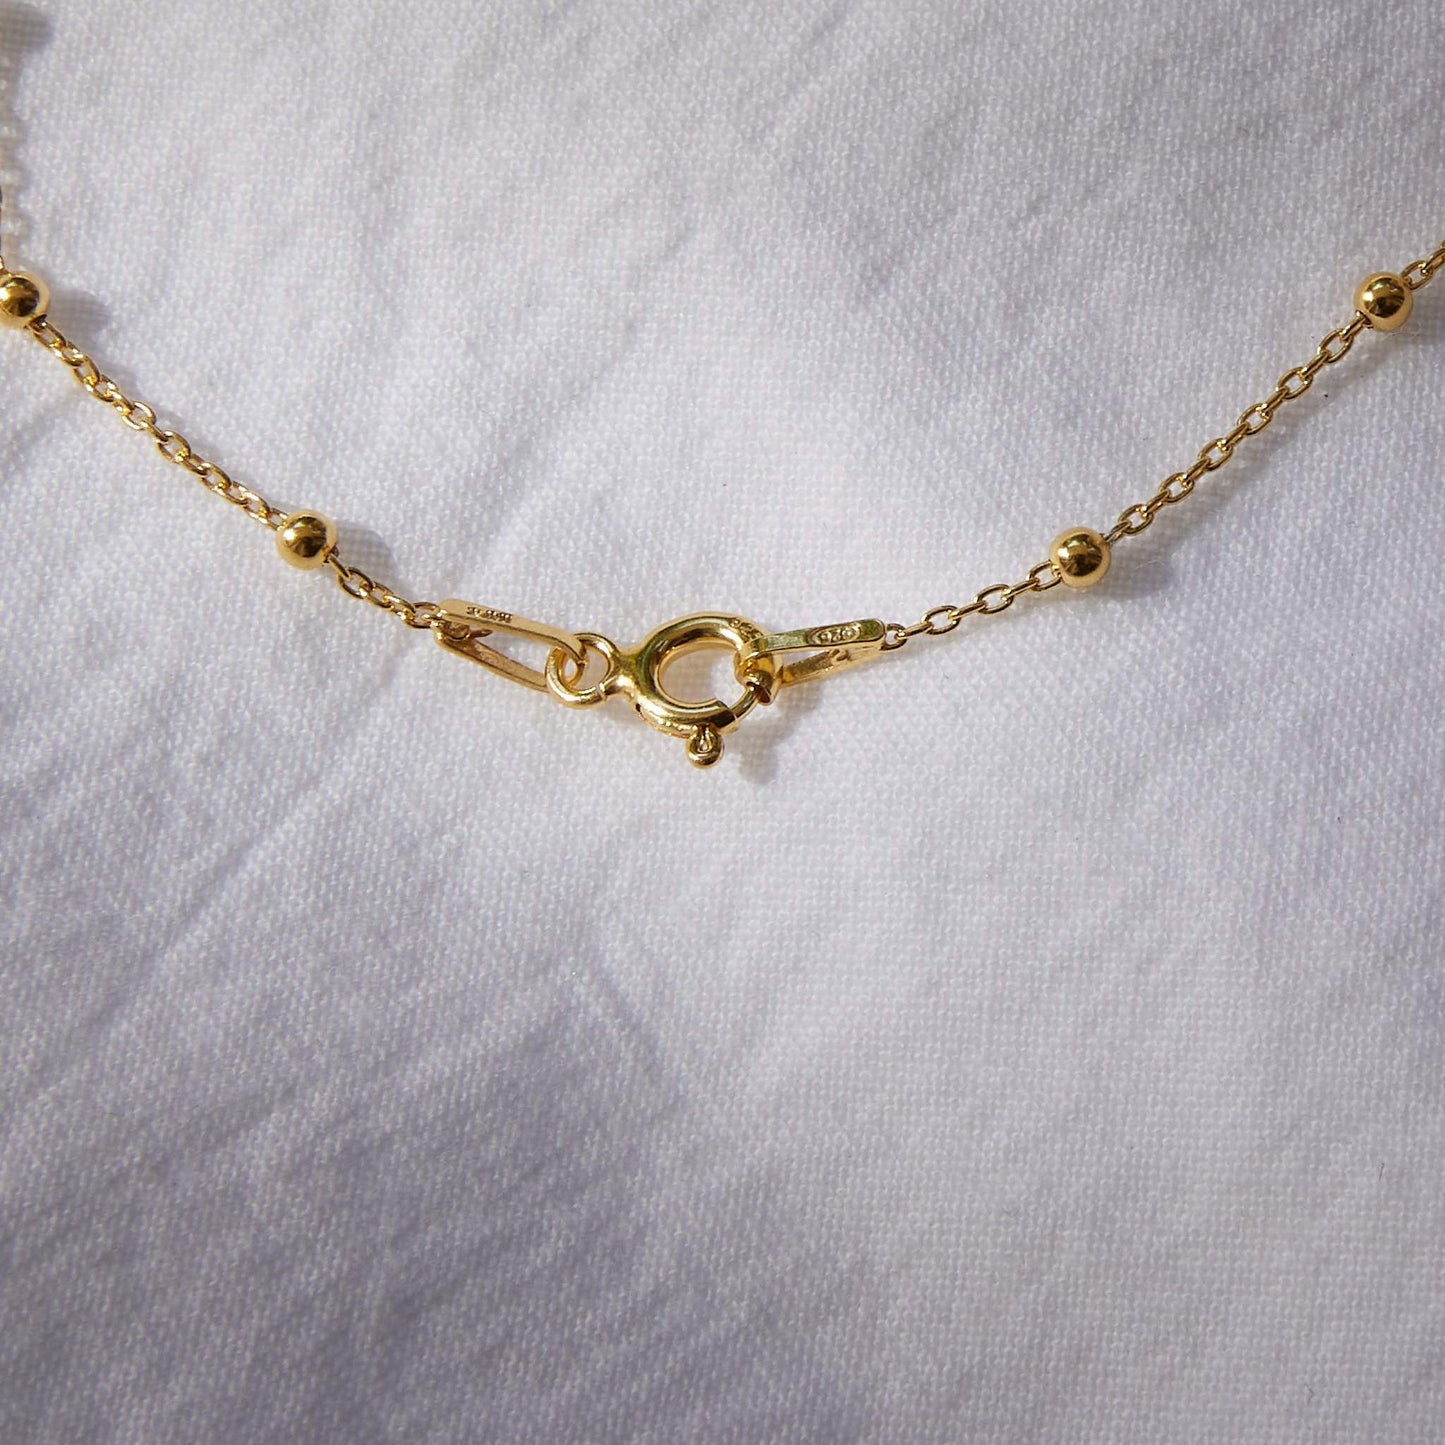 Sunrise on 24k Gold plated ball chain